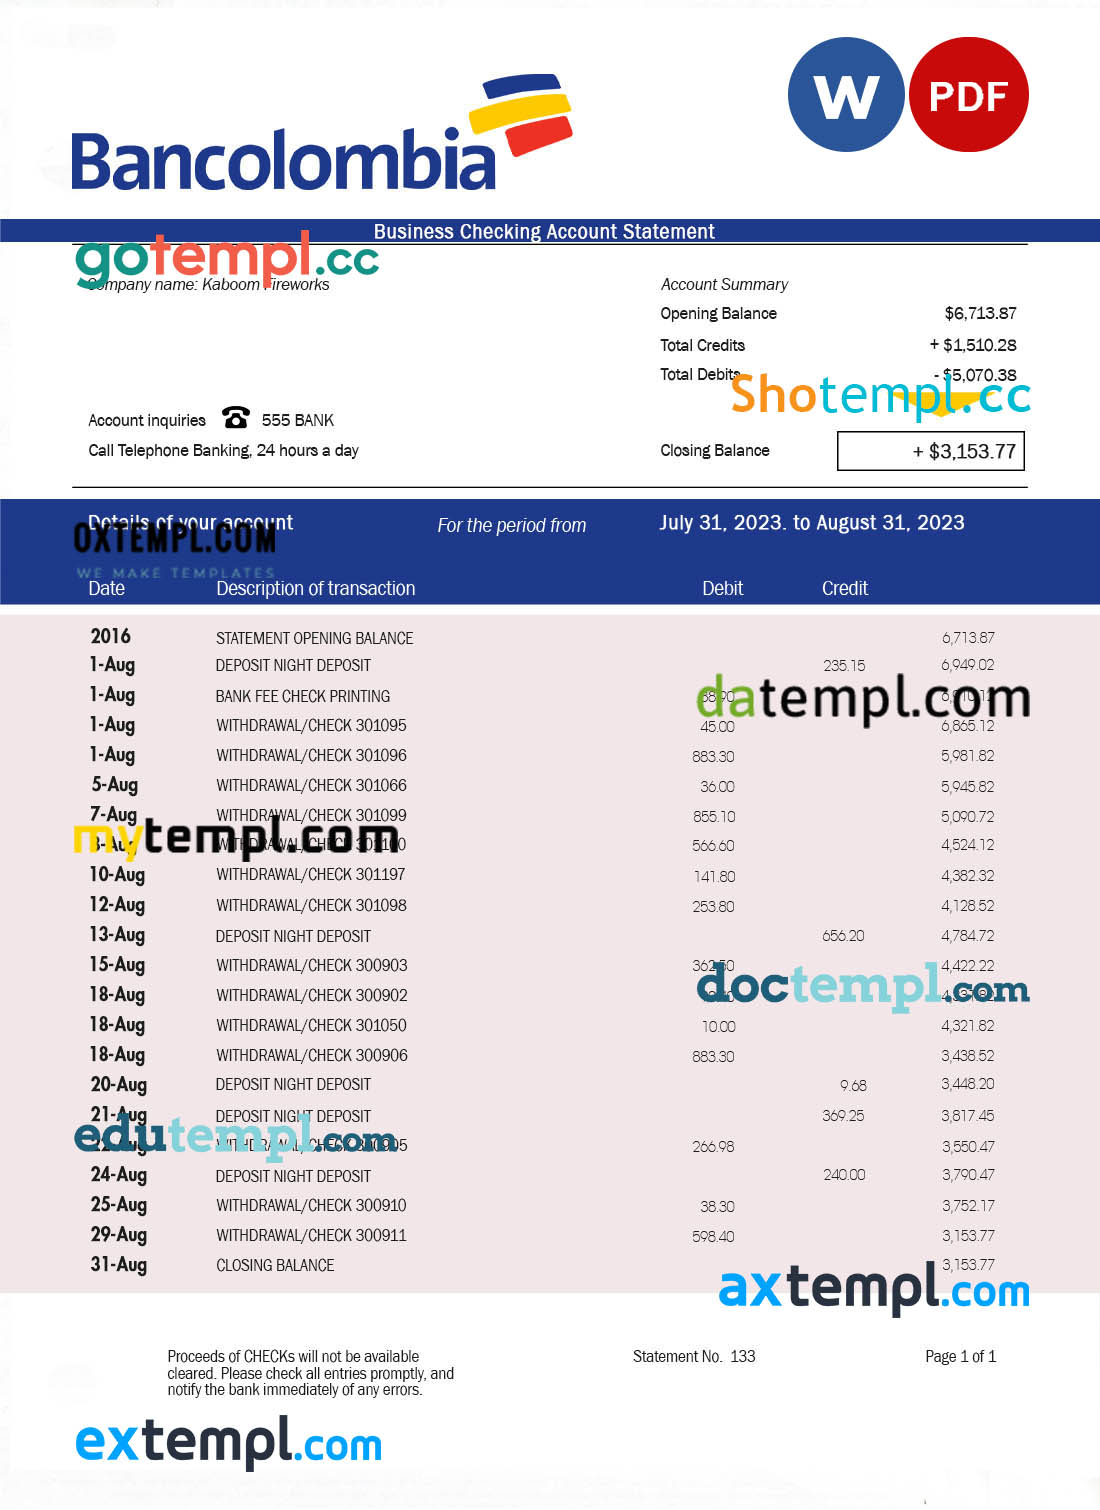 Bancolombia Bank firm statement Word and PDF template